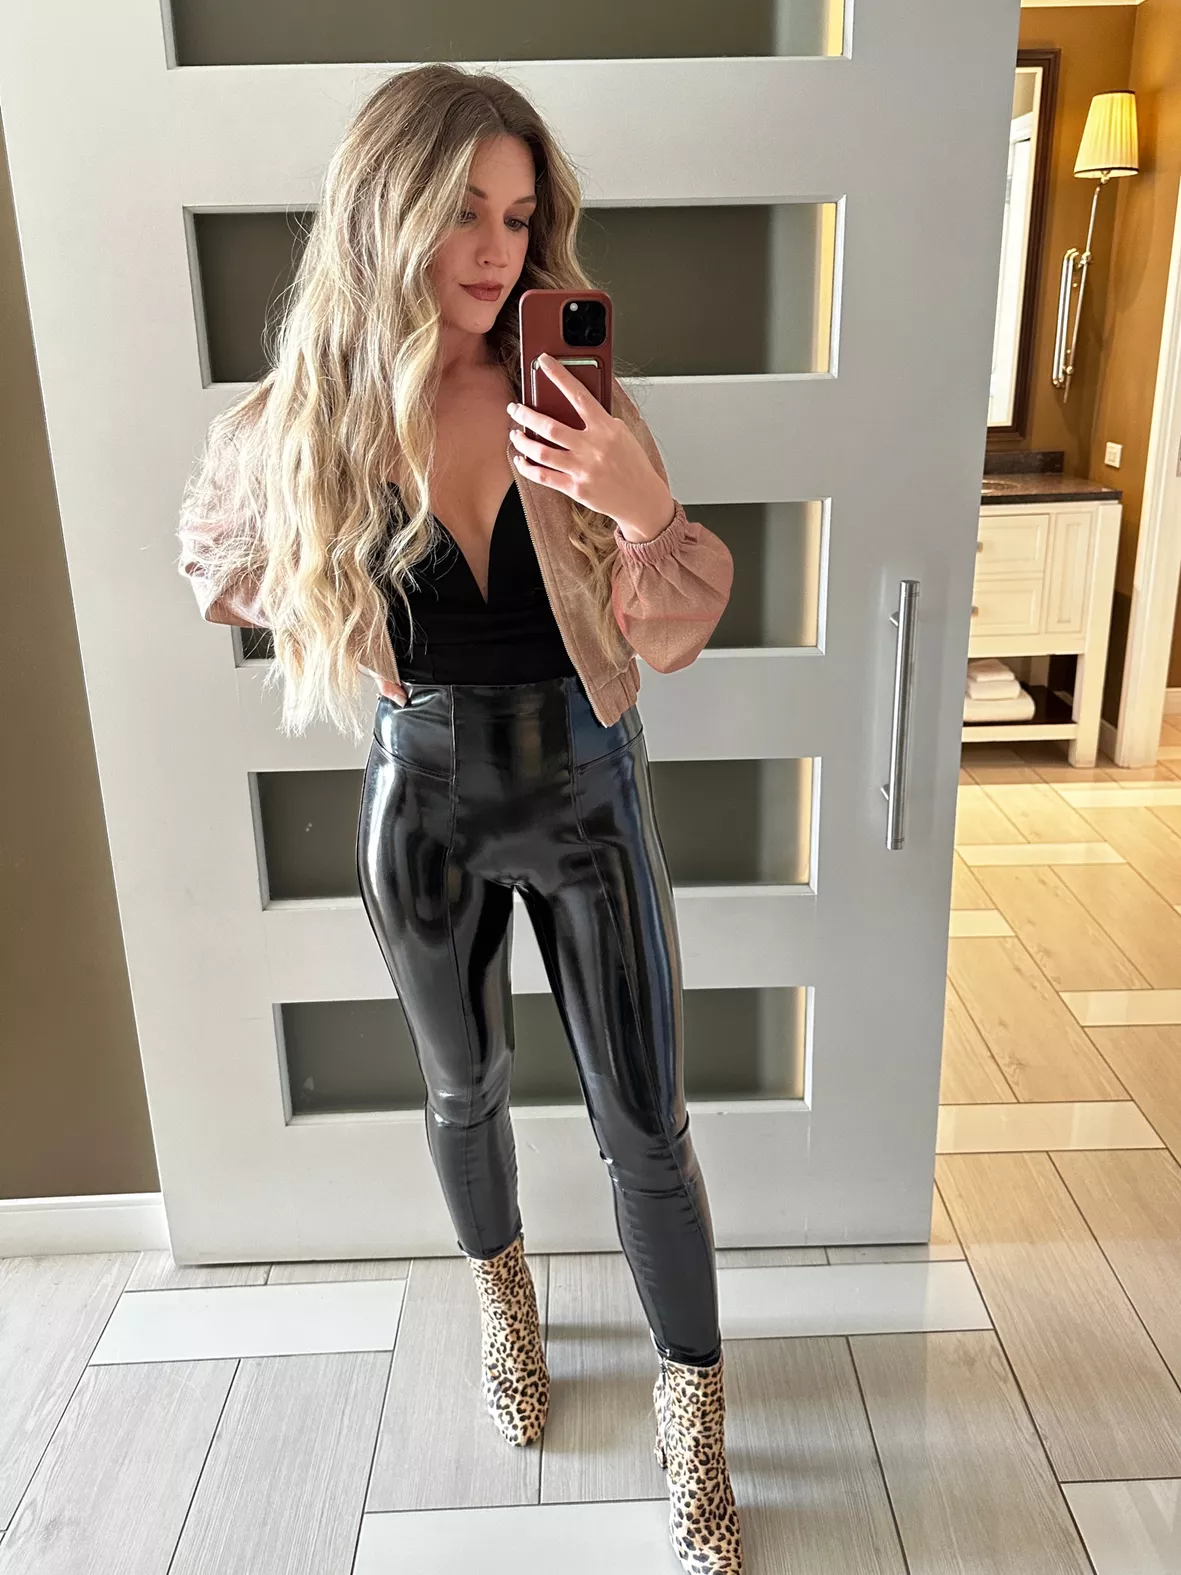 Patent leather leggings have now entered the chat. 🖤 I'm so